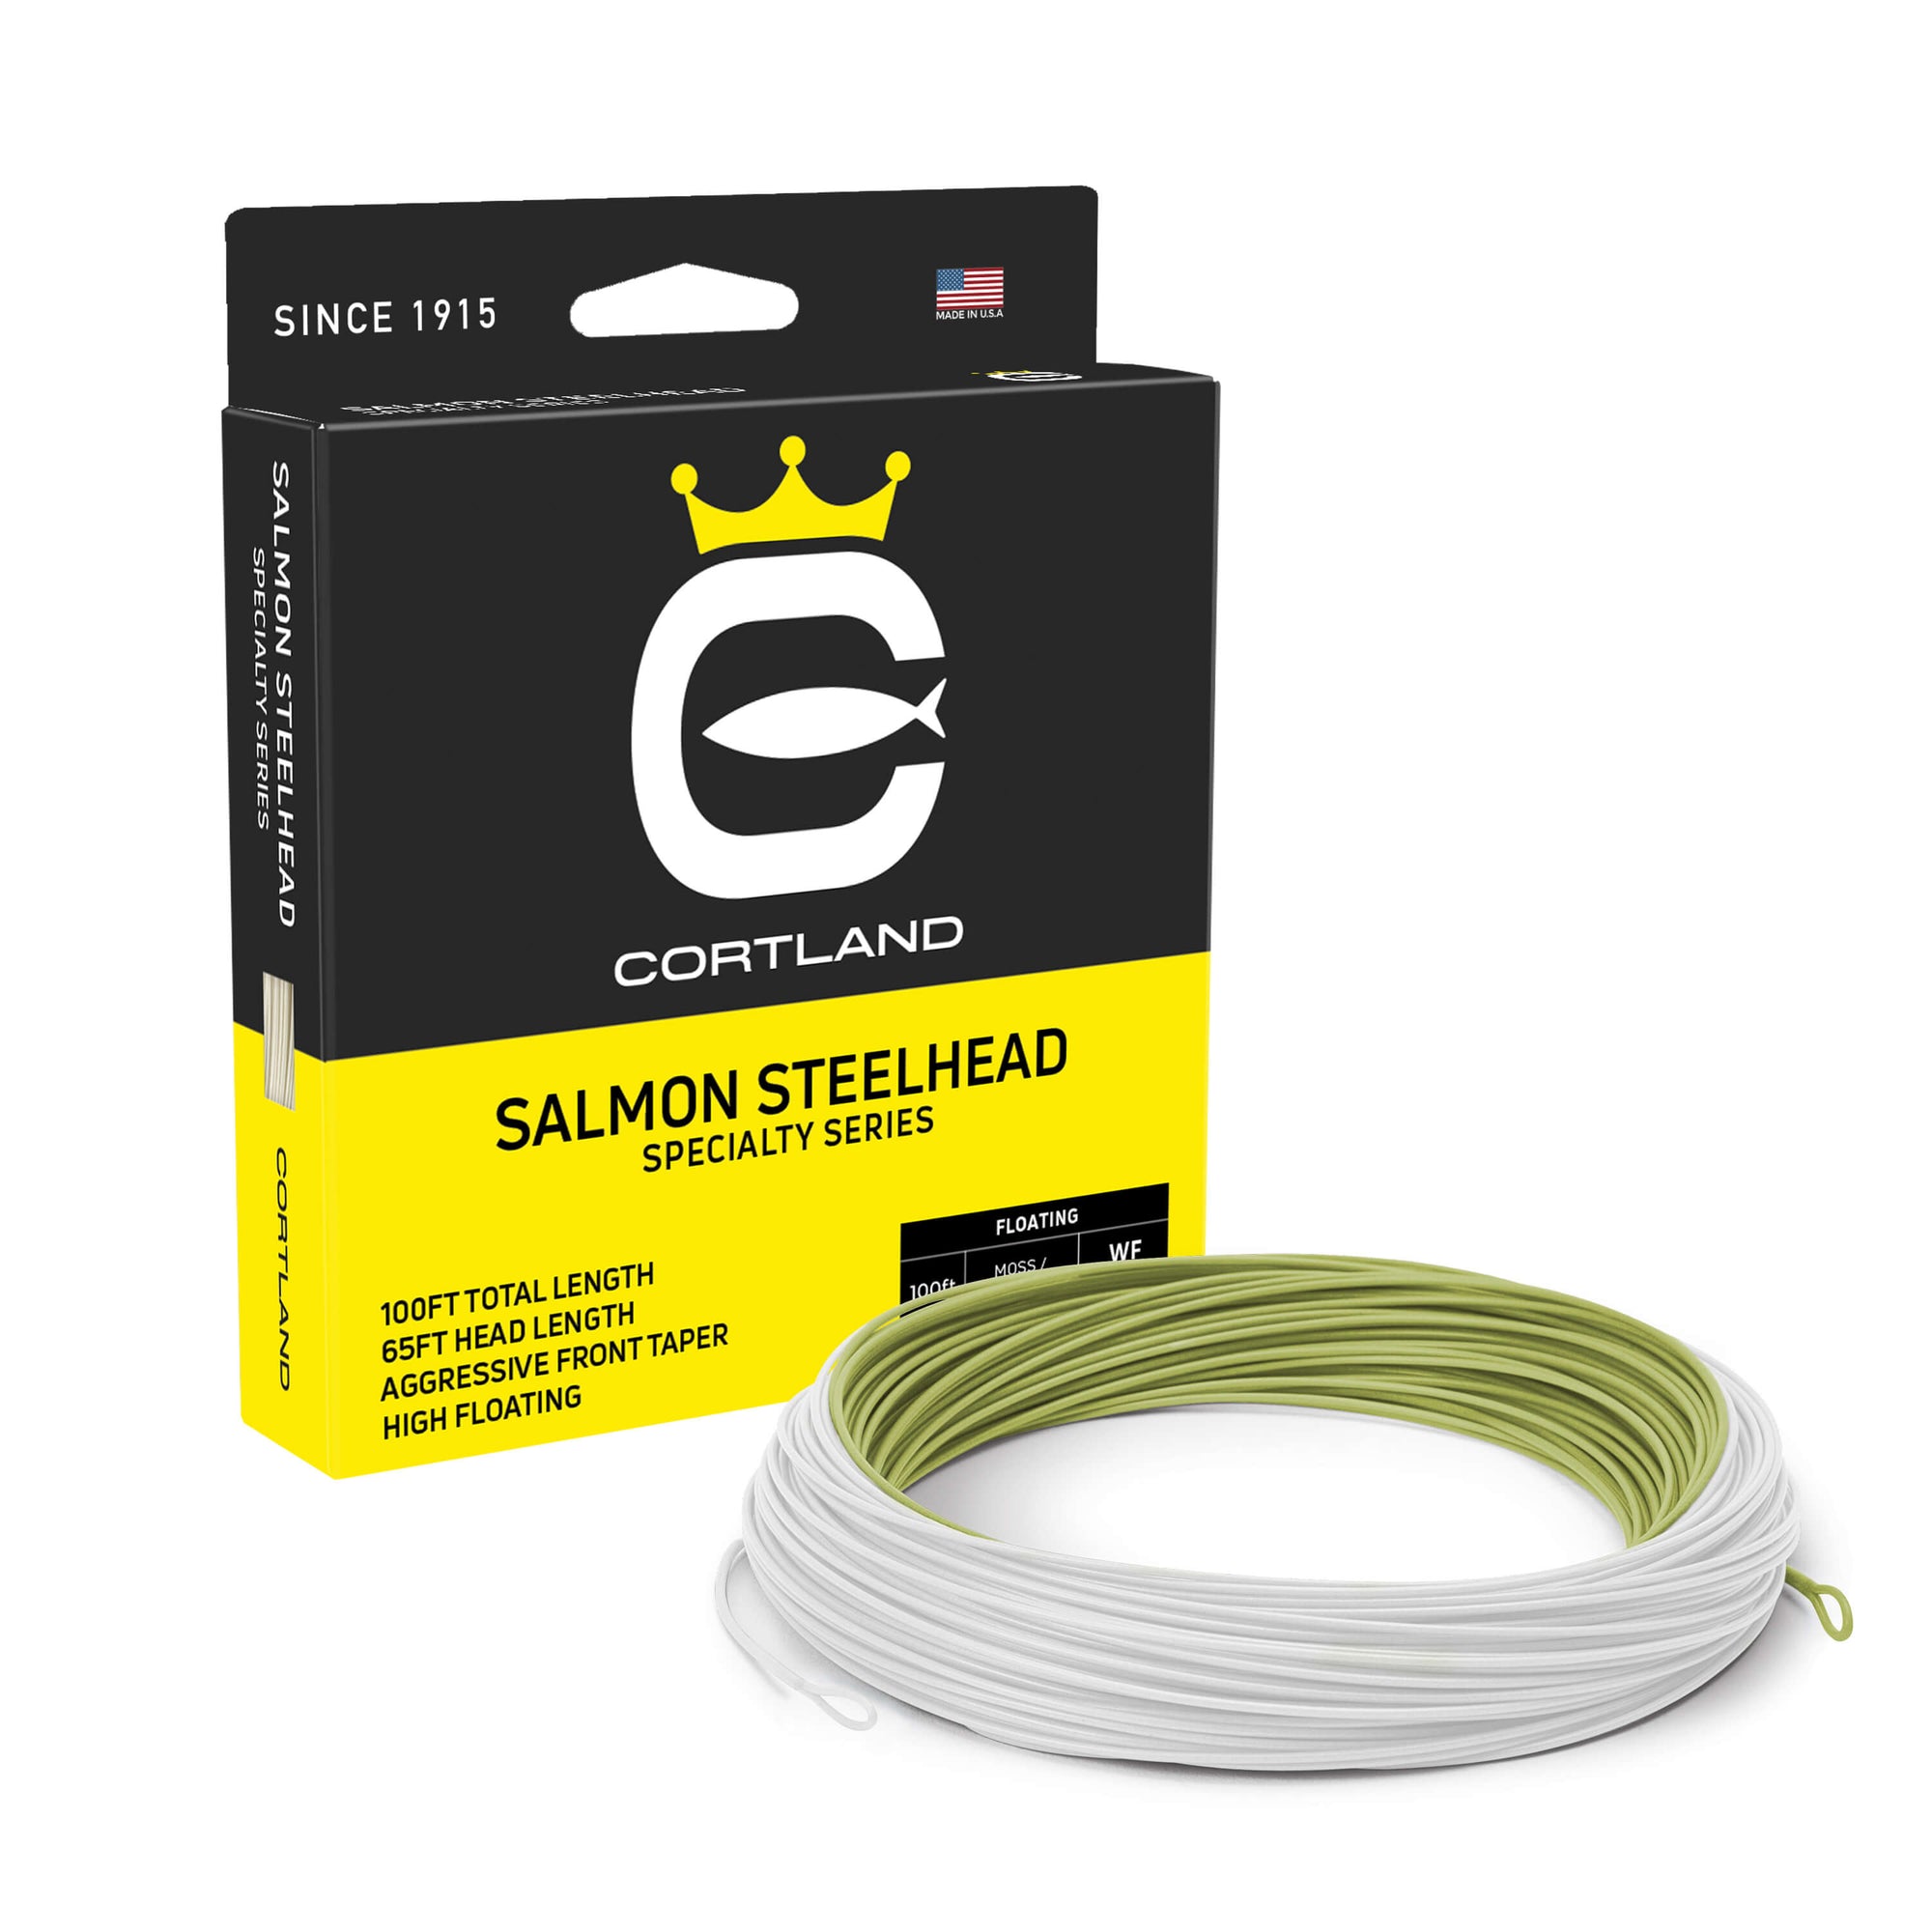 CORTLAND 444 Sink Tip Type 6 Fly Line - North Country Angler Fly